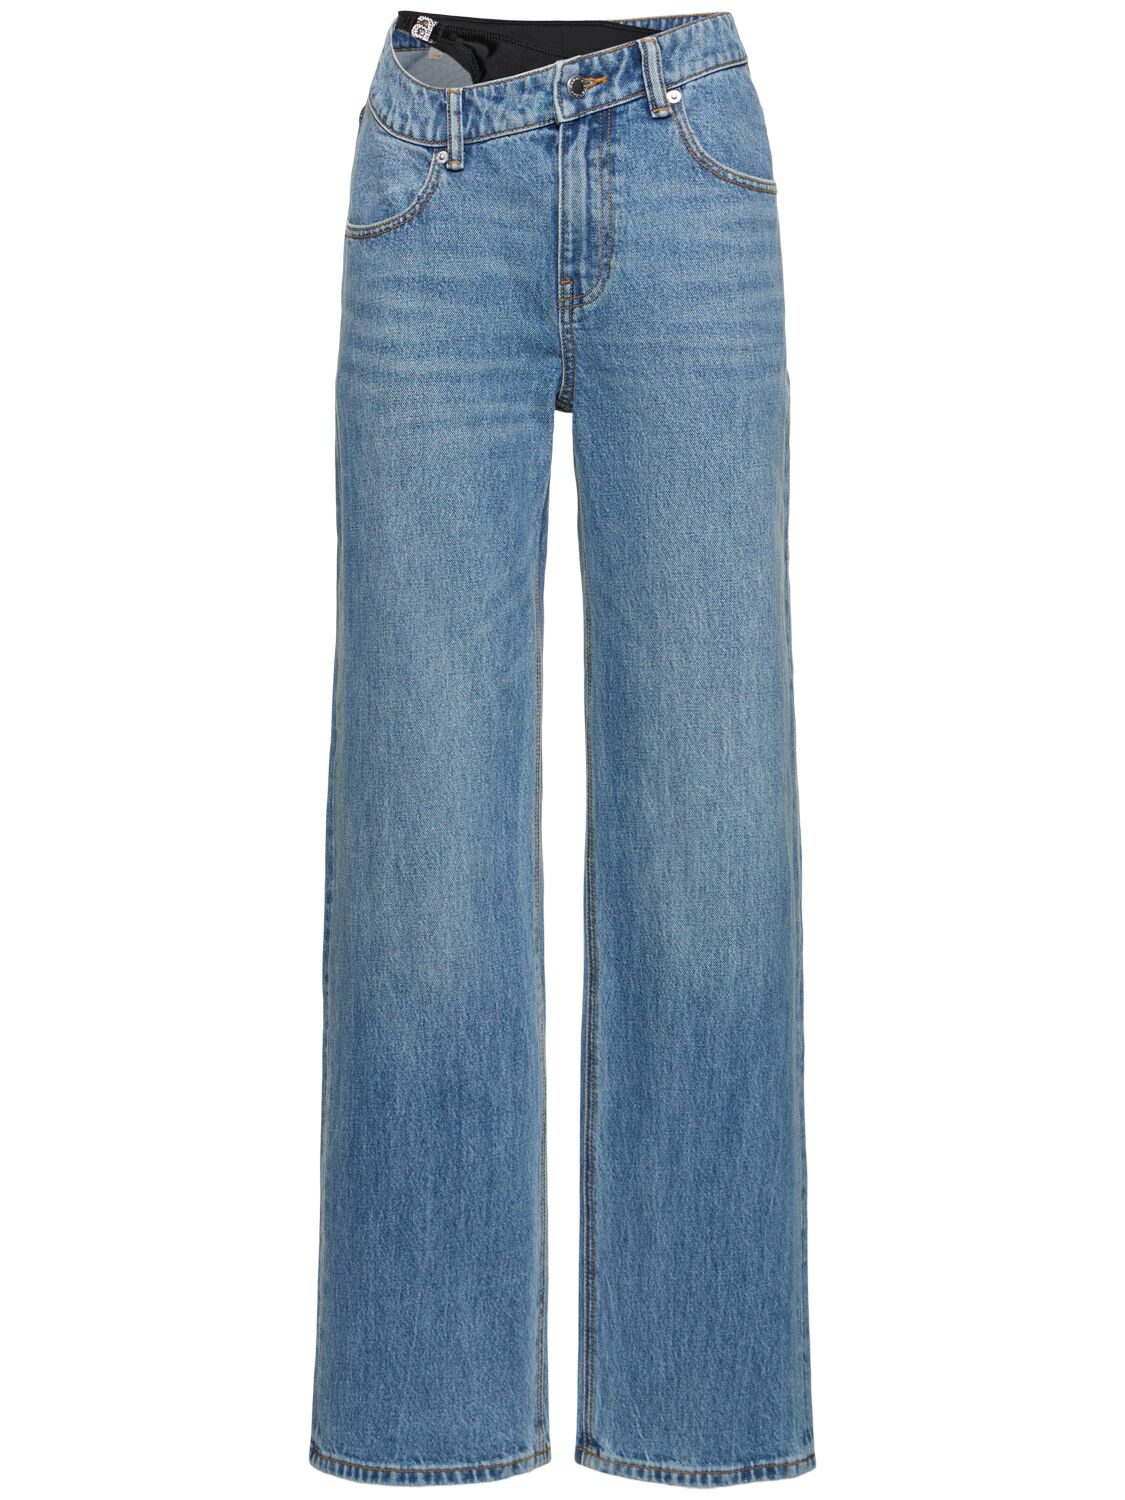 Image of Asymmetrical Waistband Cotton Jeans